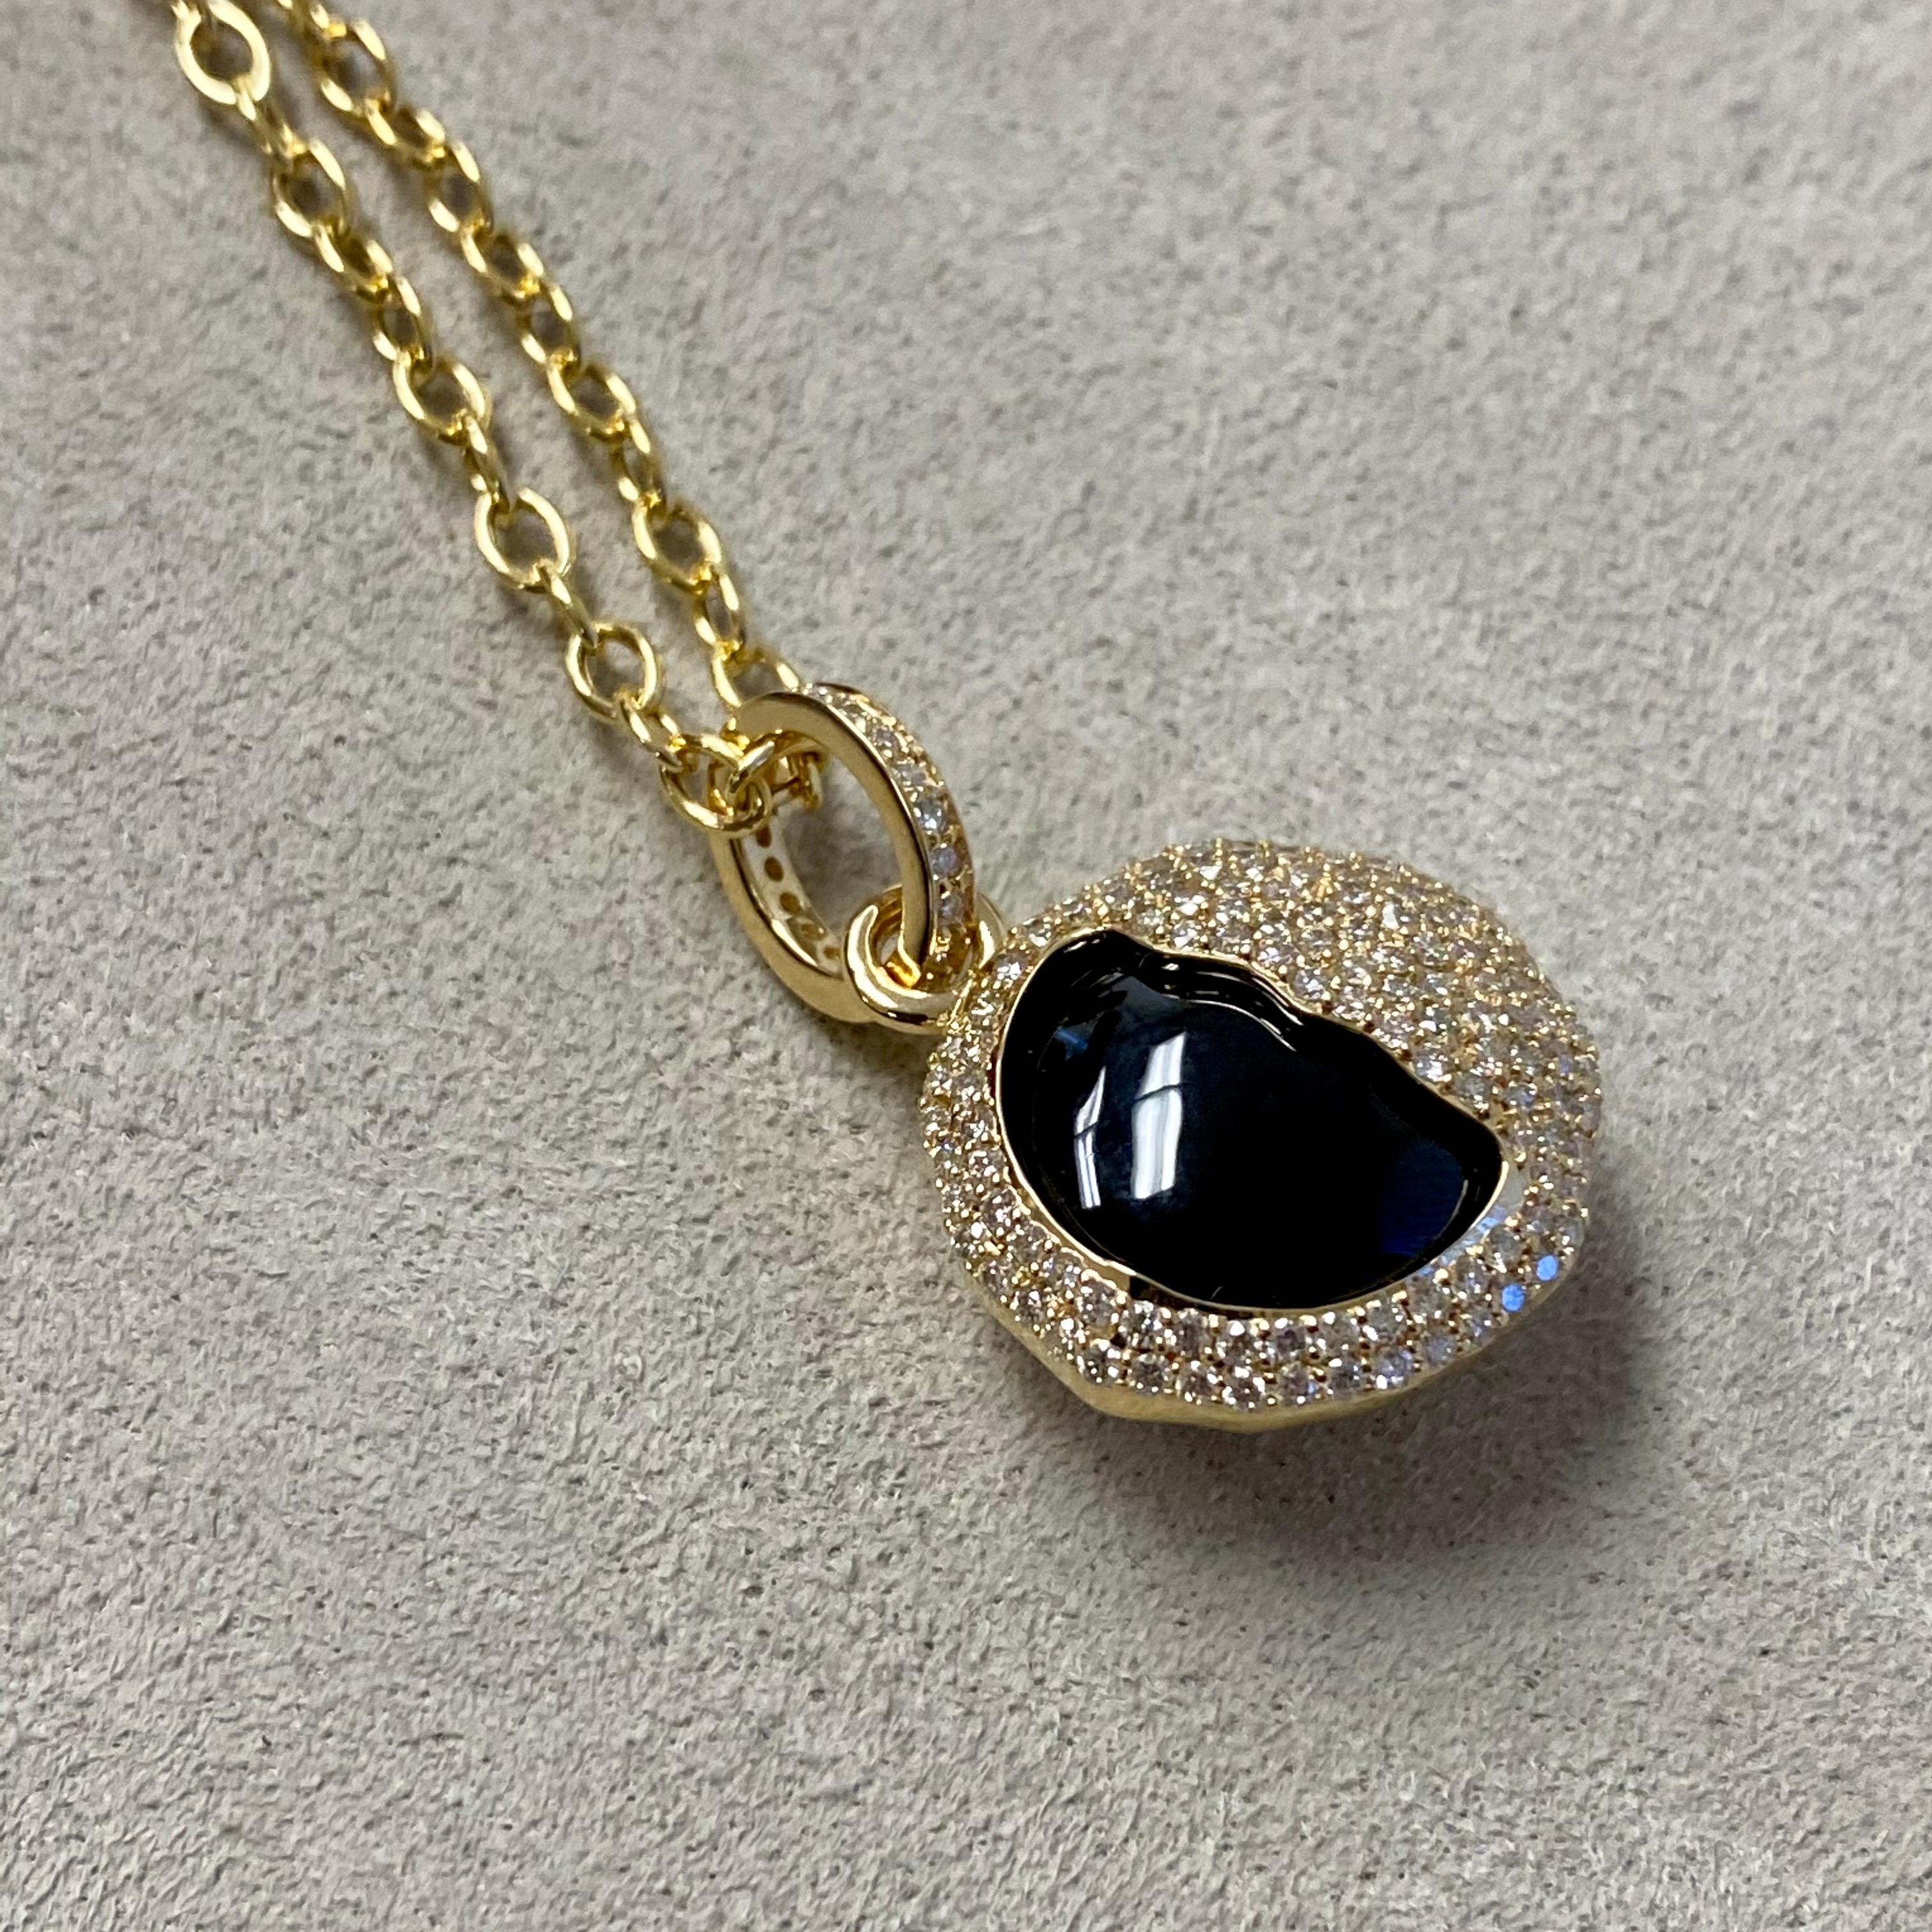 Contemporary Syna Yellow Gold Eclipse Pendant with Black Onyx and Diamonds